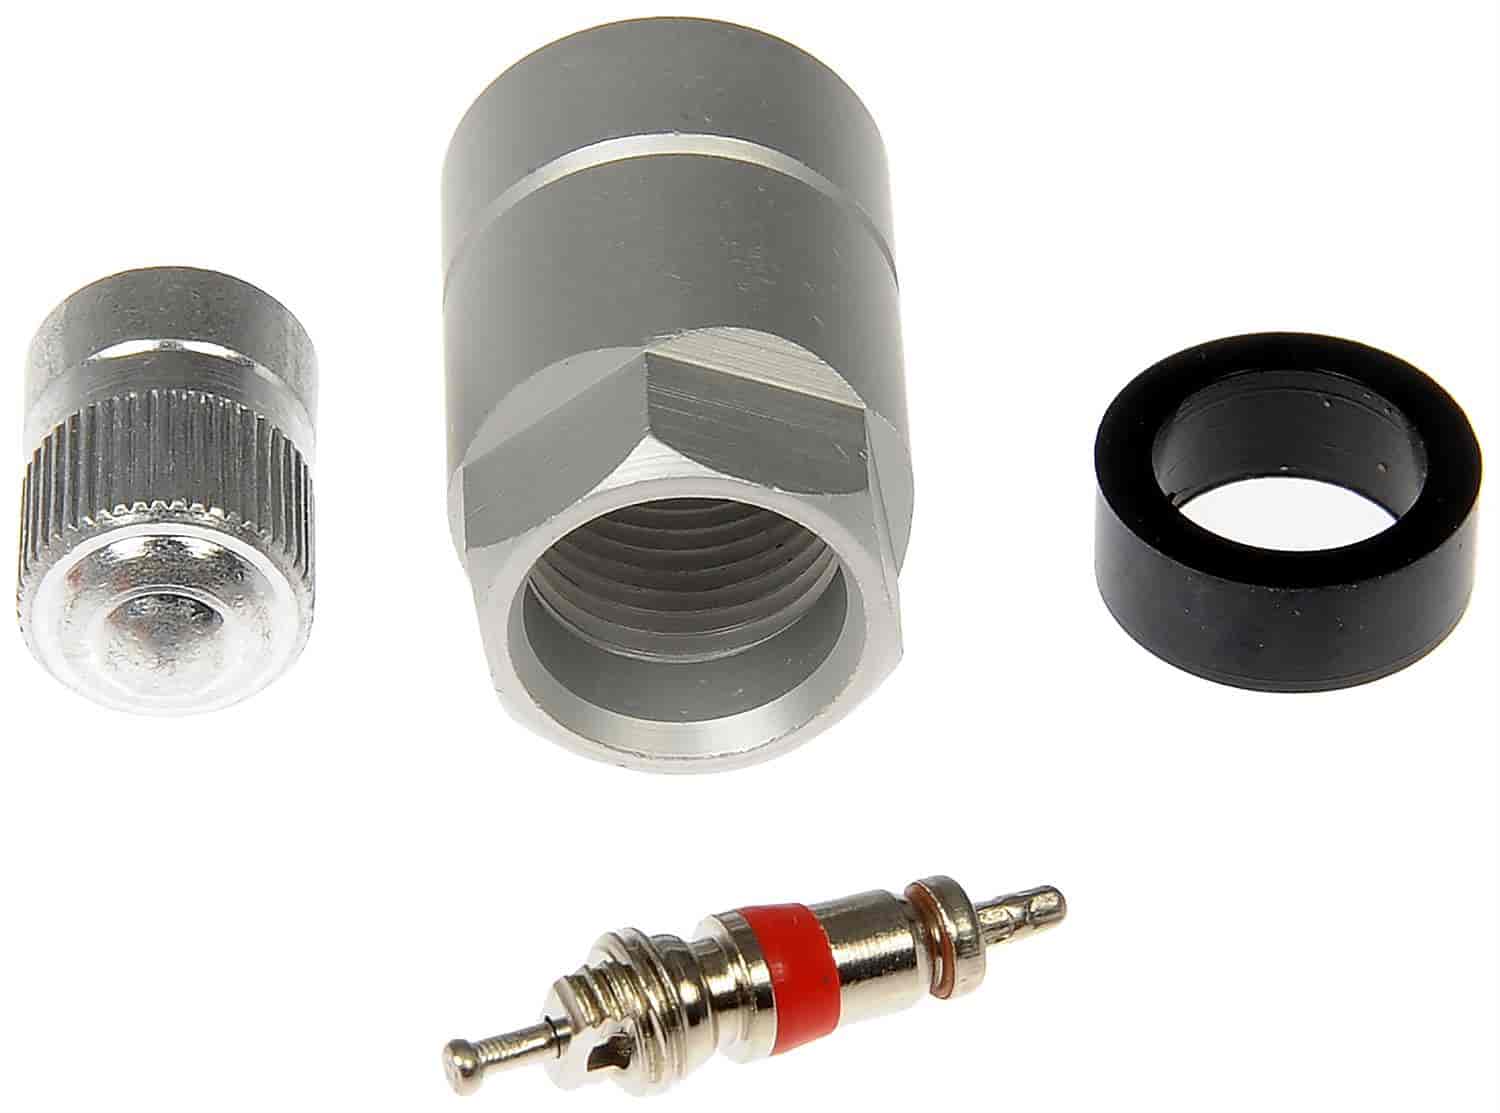 TPMS Service Kit - Replacement Grommet Valve Core and Cap